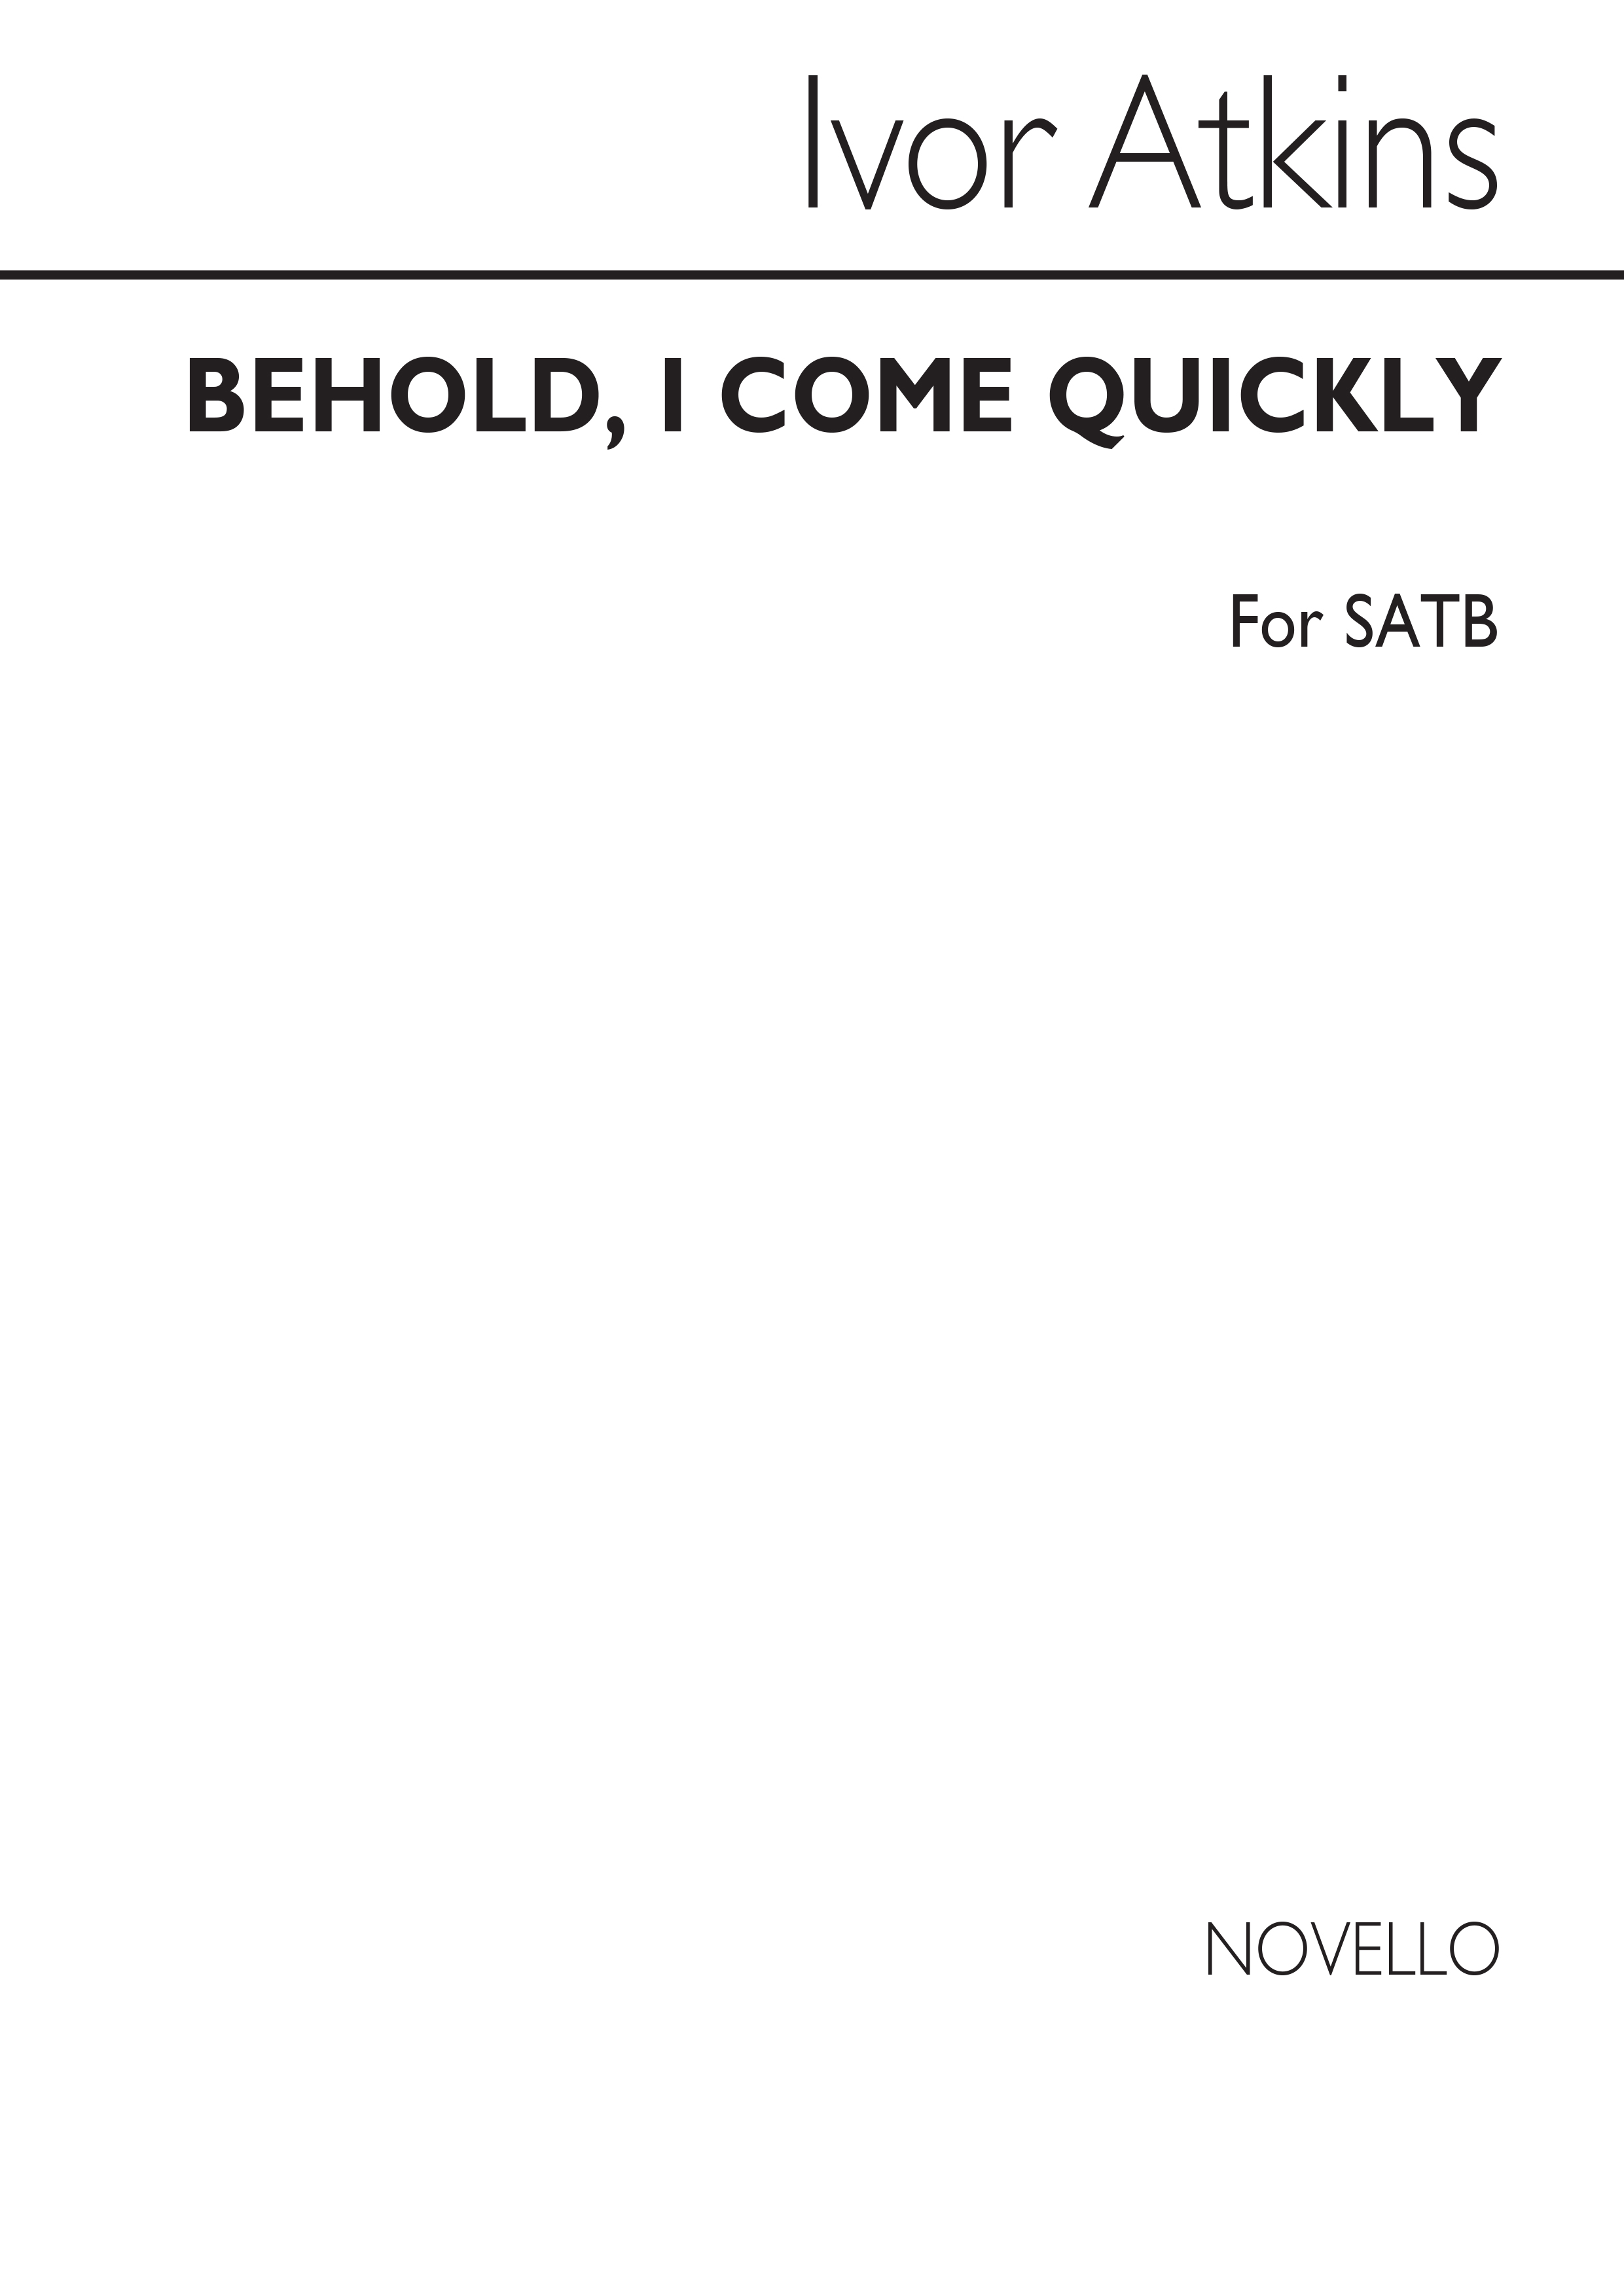 Atkins: Behold, I Come Quickly for SATB Chorus with Organ Accompaniment